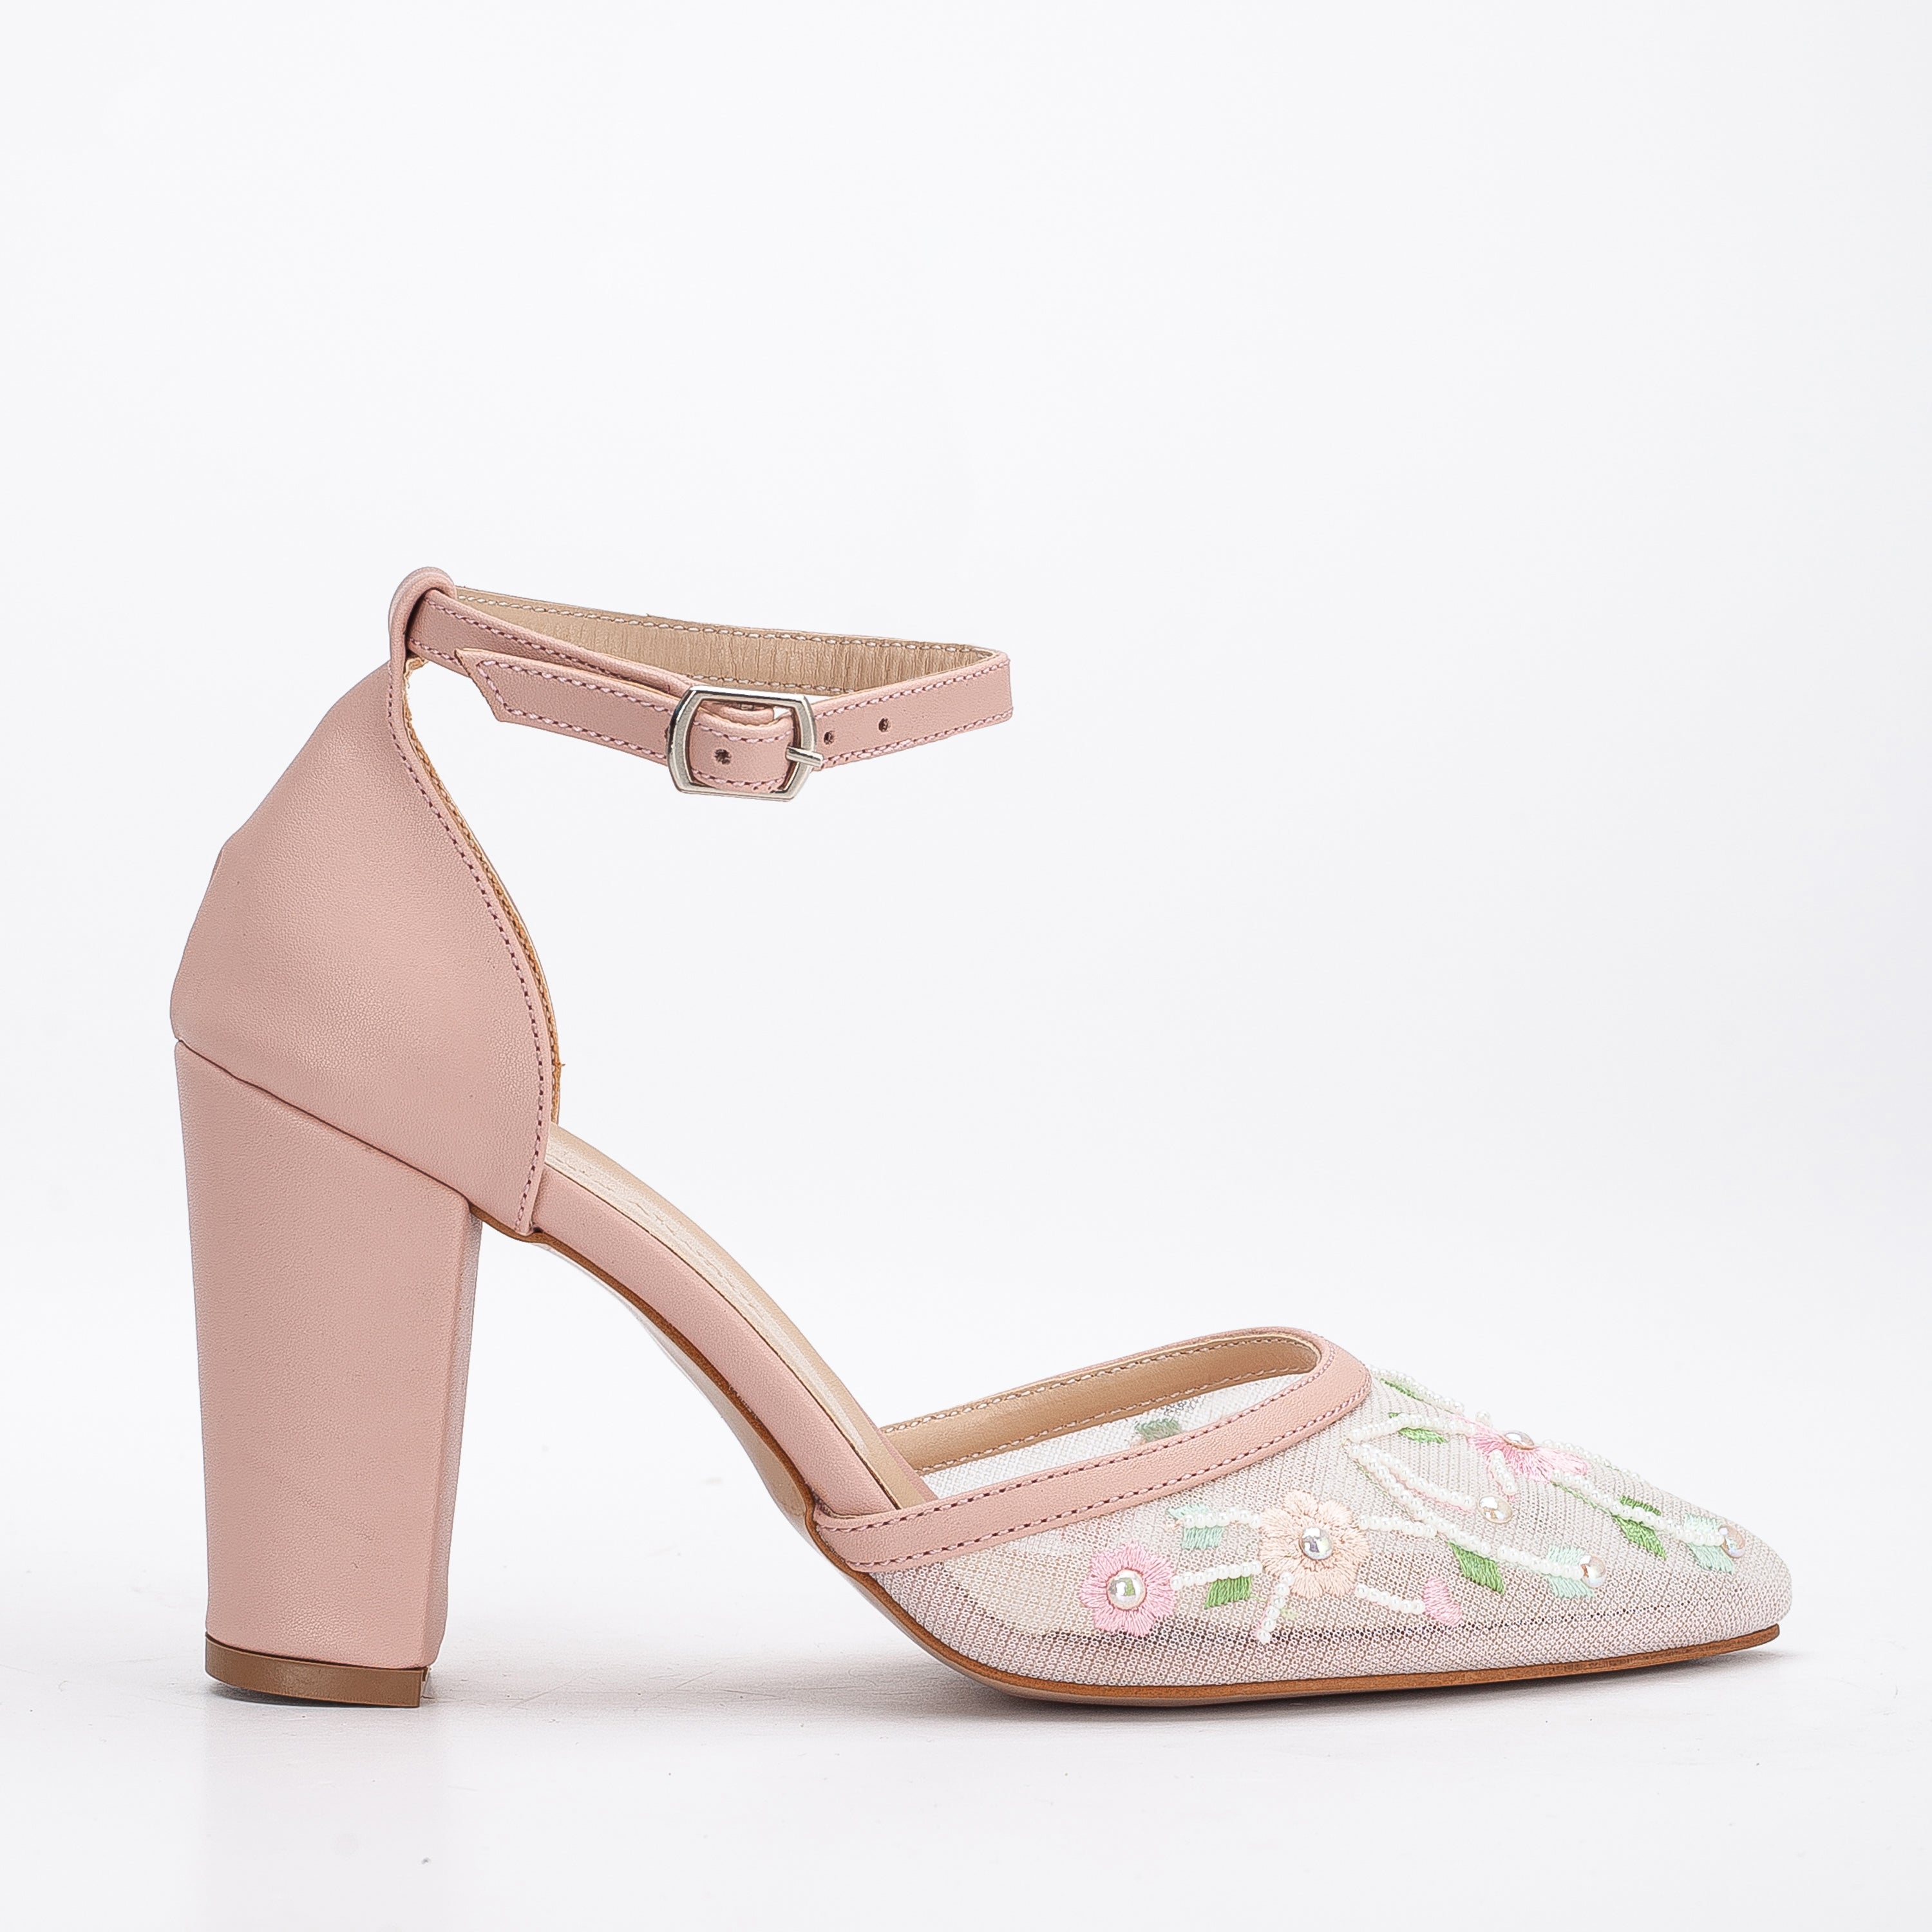 Baby pink embroidered high heels, Embroidered baby pink heels, Baby pink floral embroidered heels, Baby pink embellished high heels, Baby pink heels with intricate embroidery, Baby pink embroidered stilettos, Baby pink embroidered pumps, Baby pink high heels with delicate embroidery, Baby pink embroidered wedding heels, Baby pink embroidered bridal shoes.